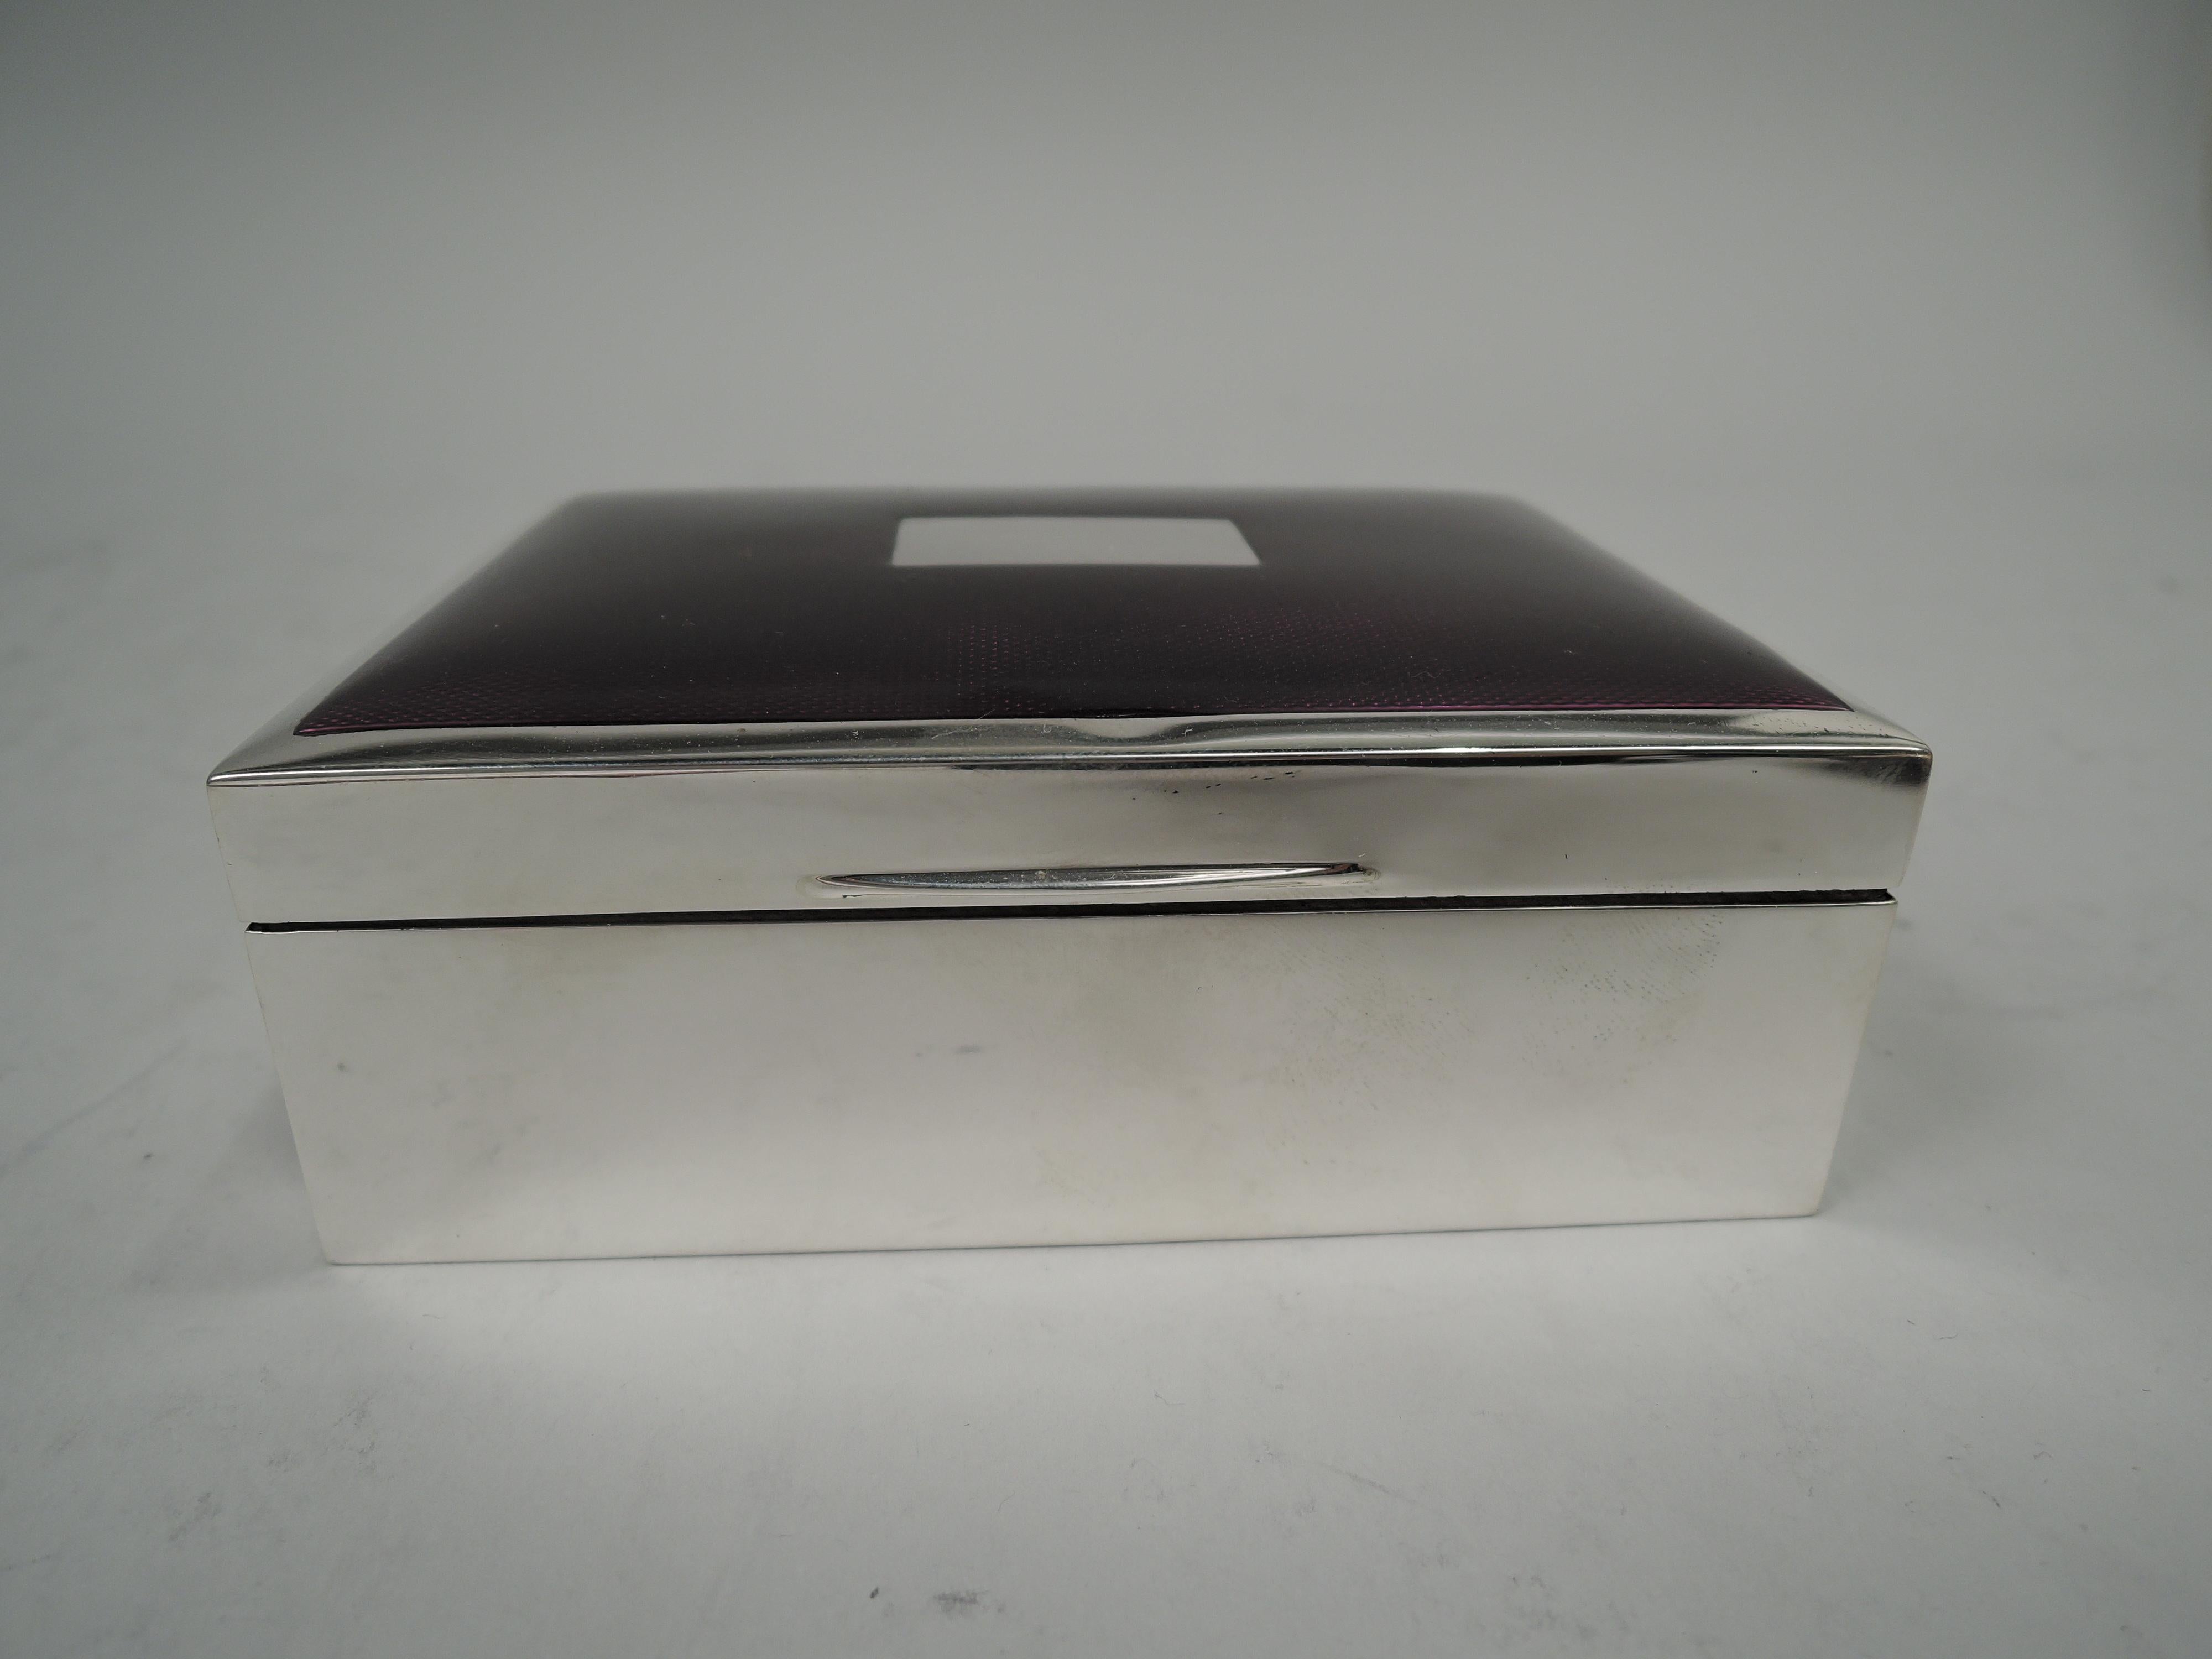 Art Deco sterling silver and enamel box. Made by Harman Brothers in Birmingham in 1972. Rectangular with straight sides. Cover hinged and tabbed; top gently curved with rectangle (vacant) surrounded by purple guilloche enamel. Interior cedar lined.